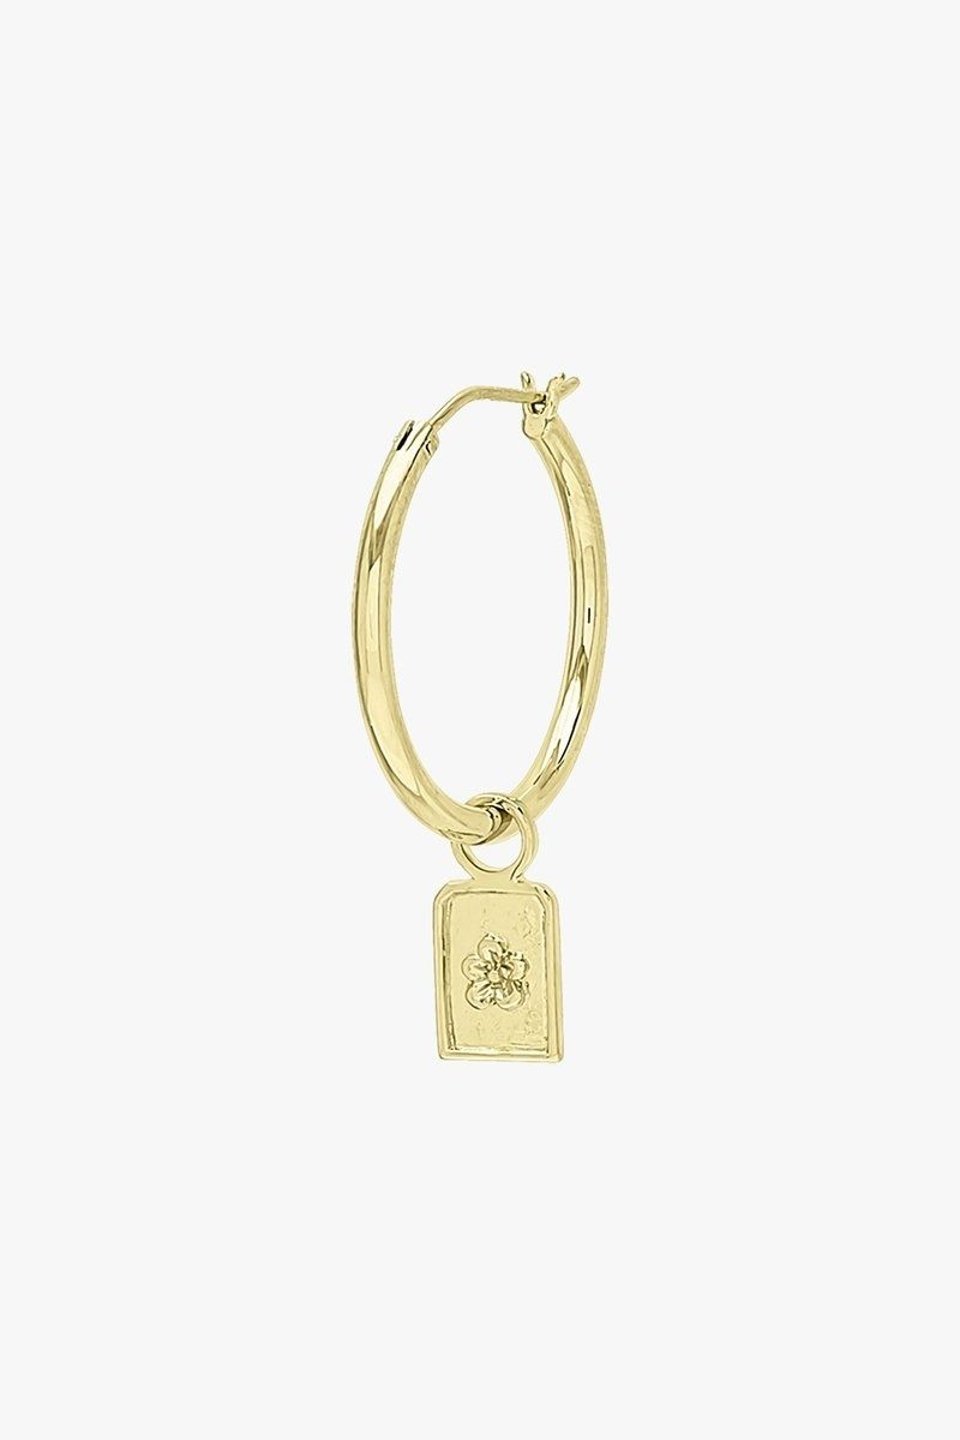 Wildthings Sauvage Earring Charm - Gold